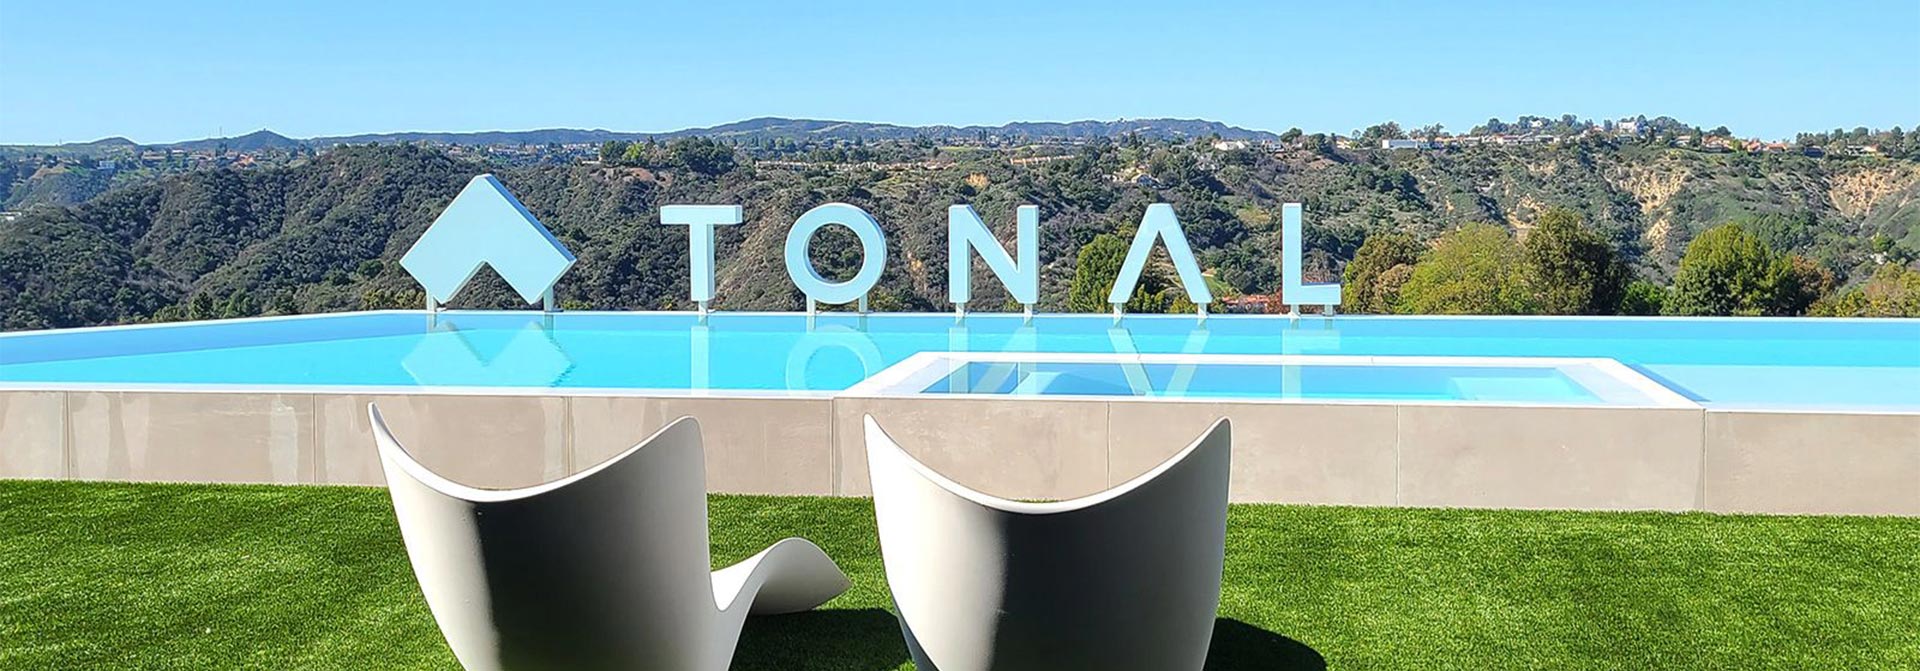 Tonal huge place branding display in white at the pool area